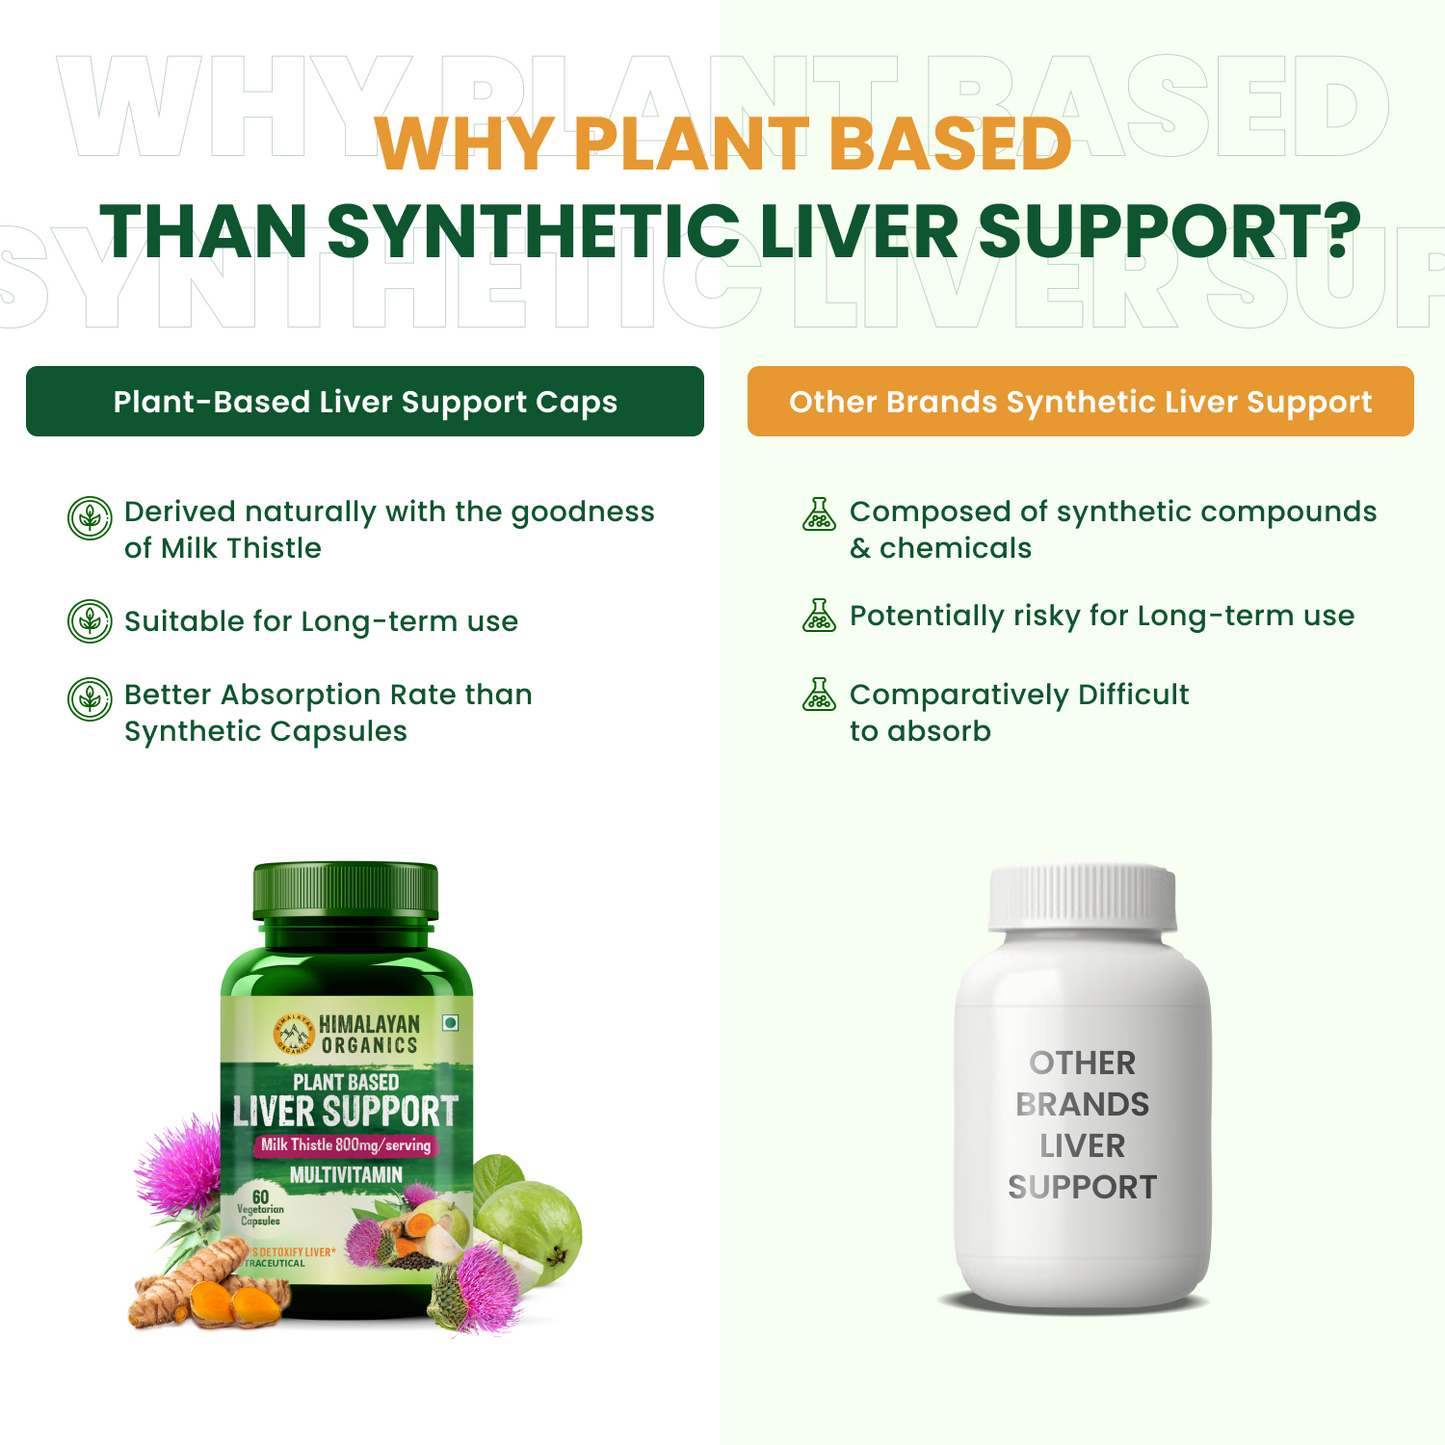 Himalayan Organics Plant Based Liver Support with Milk Thistle for Liver Support  - 60 Veg Capsules